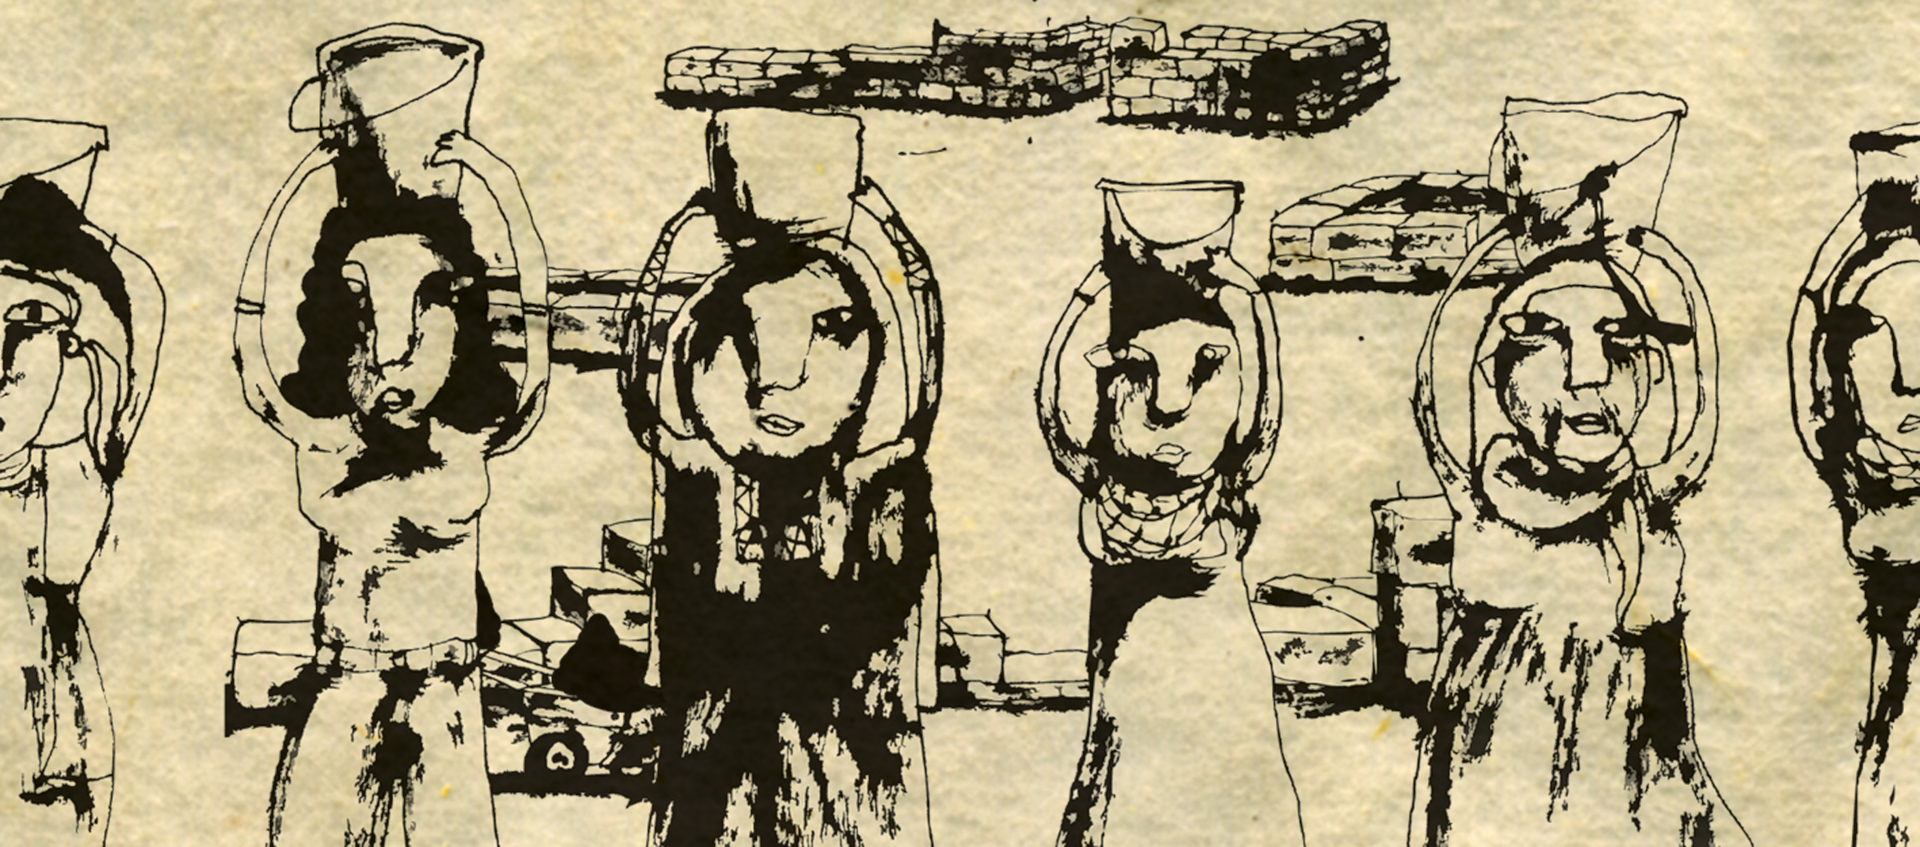 A line drawing of multiple female figures in a row holding vessel up on their heads.